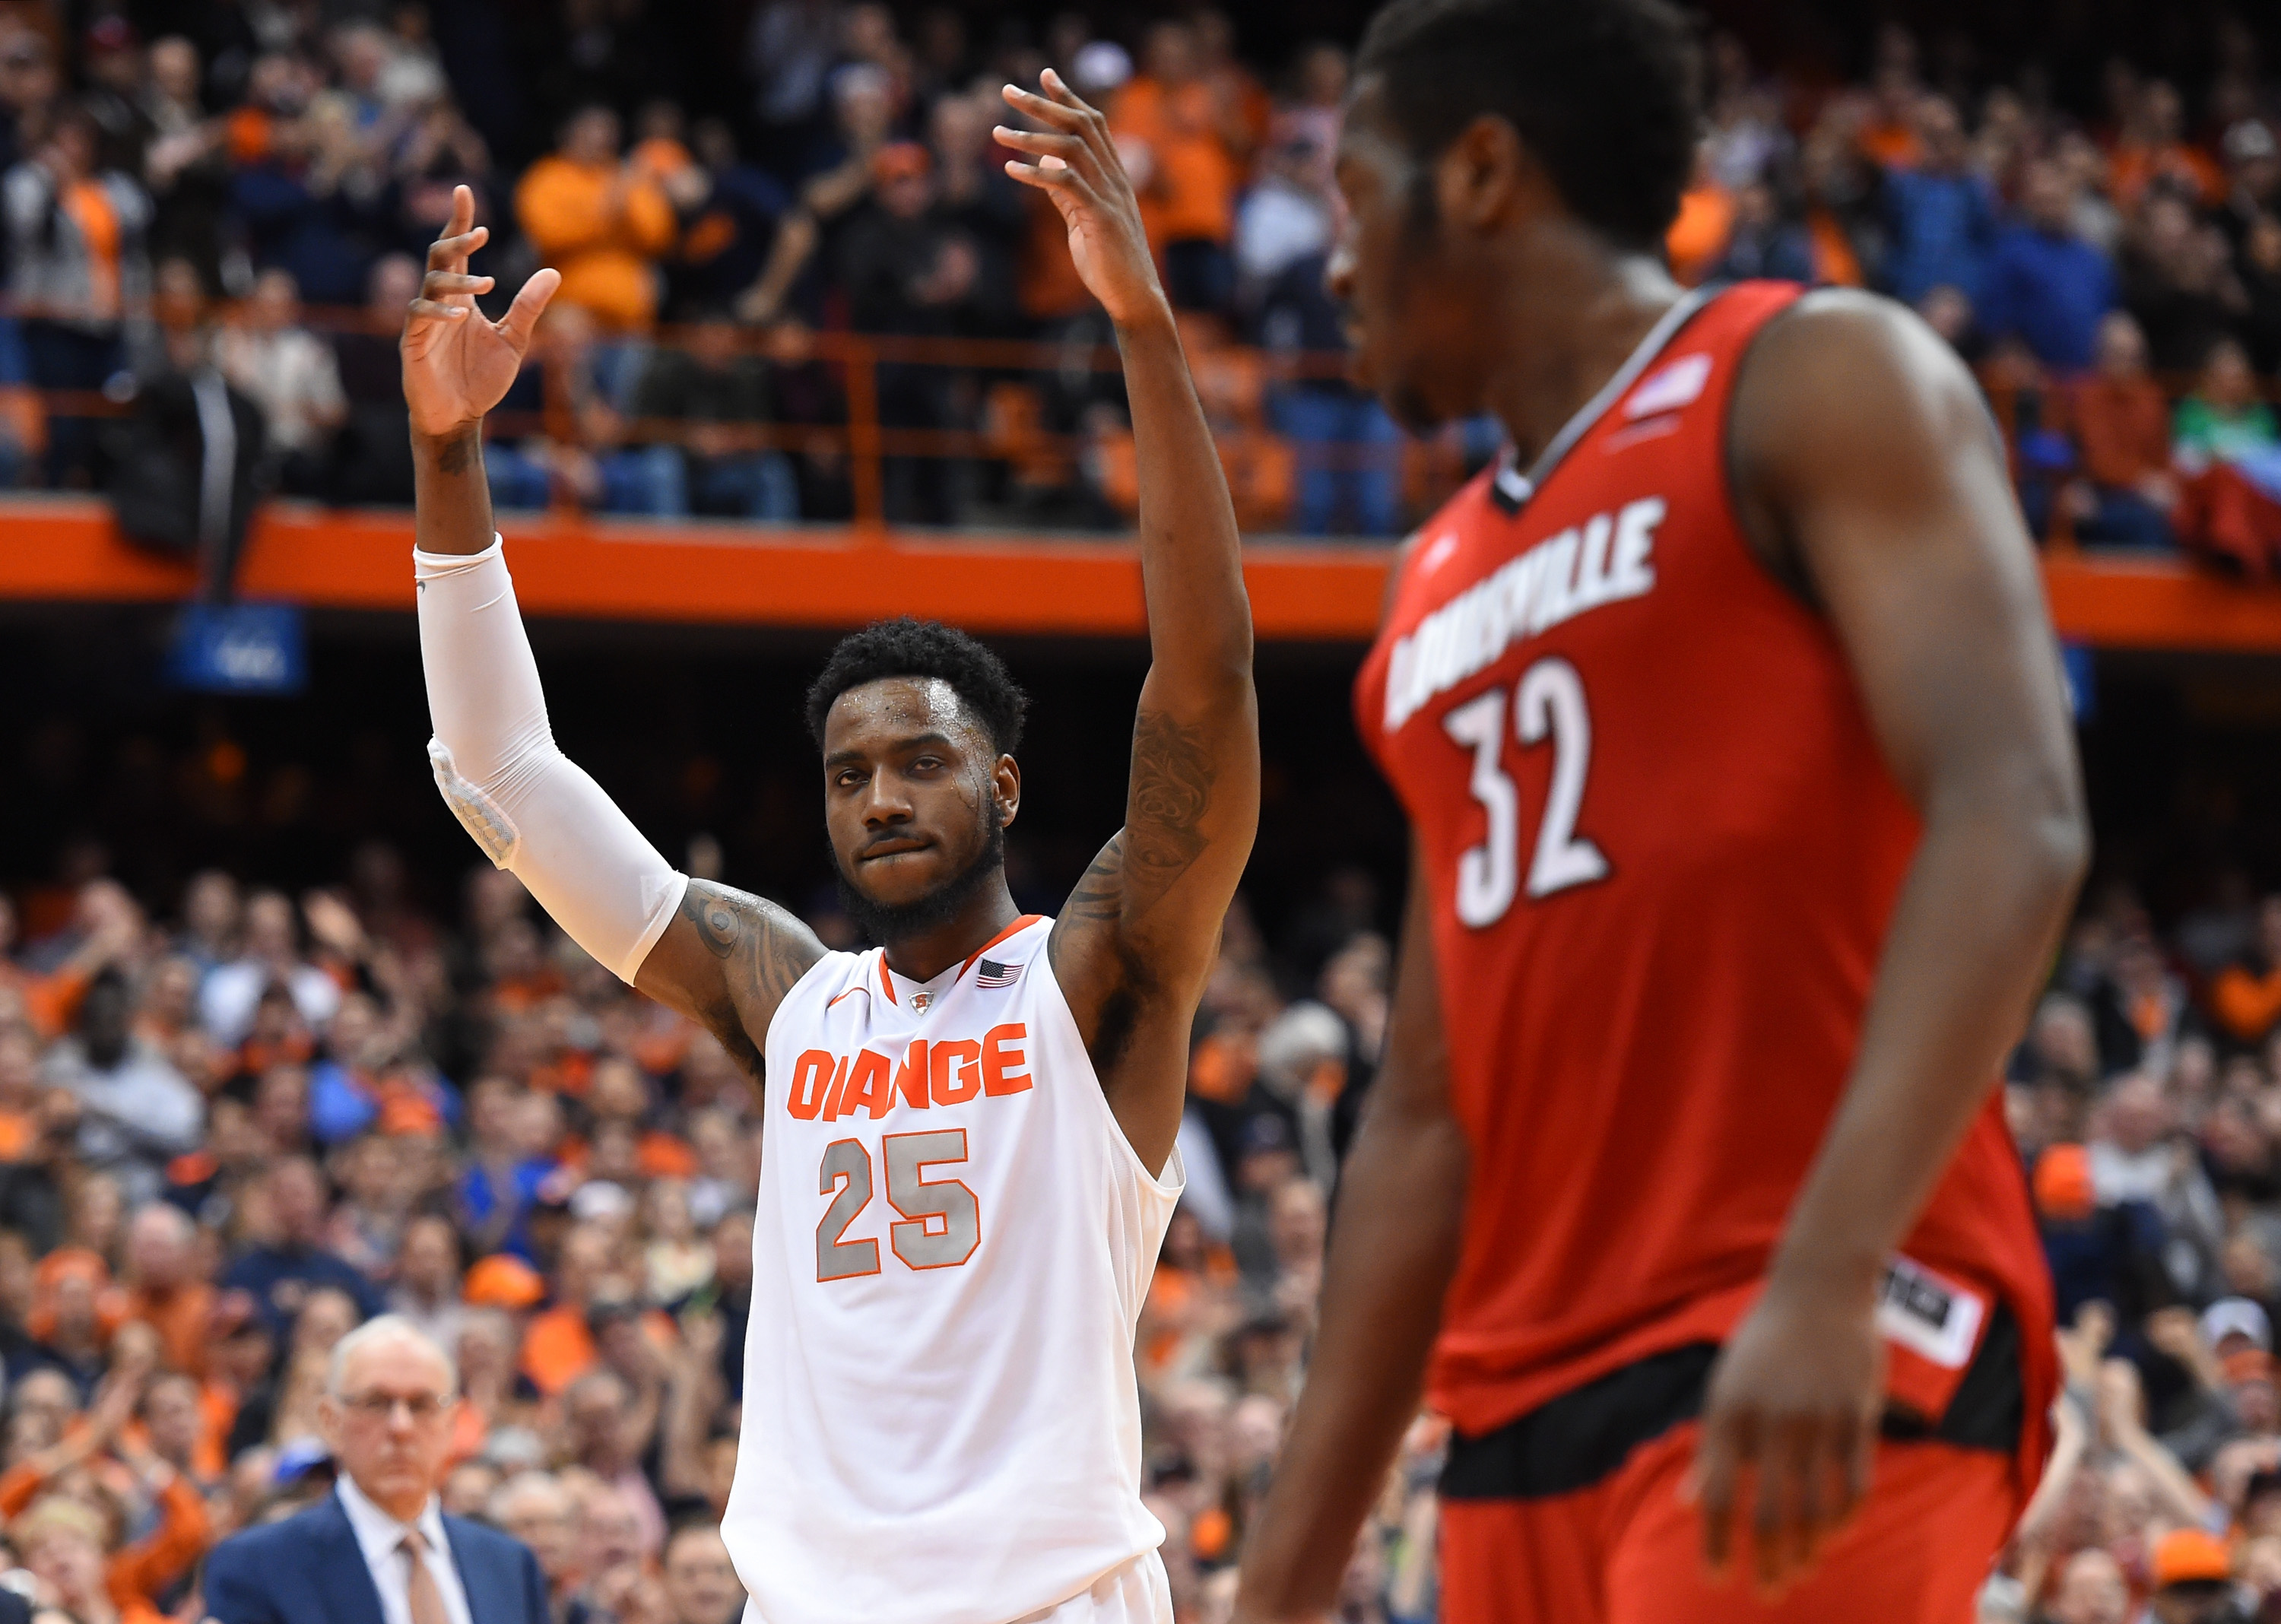 SYRACUSE, NY - FEBRUARY 18: Rakeem Christmas #25 of the Syracuse Orange celebrates in the final moments of the game against the Louisville Cardinals at the Carrier Dome on February 18, 2015 in Syracuse, New York. Syracuse defeated Louisville 69-59. (Photo by Rich Barnes/Getty Images)